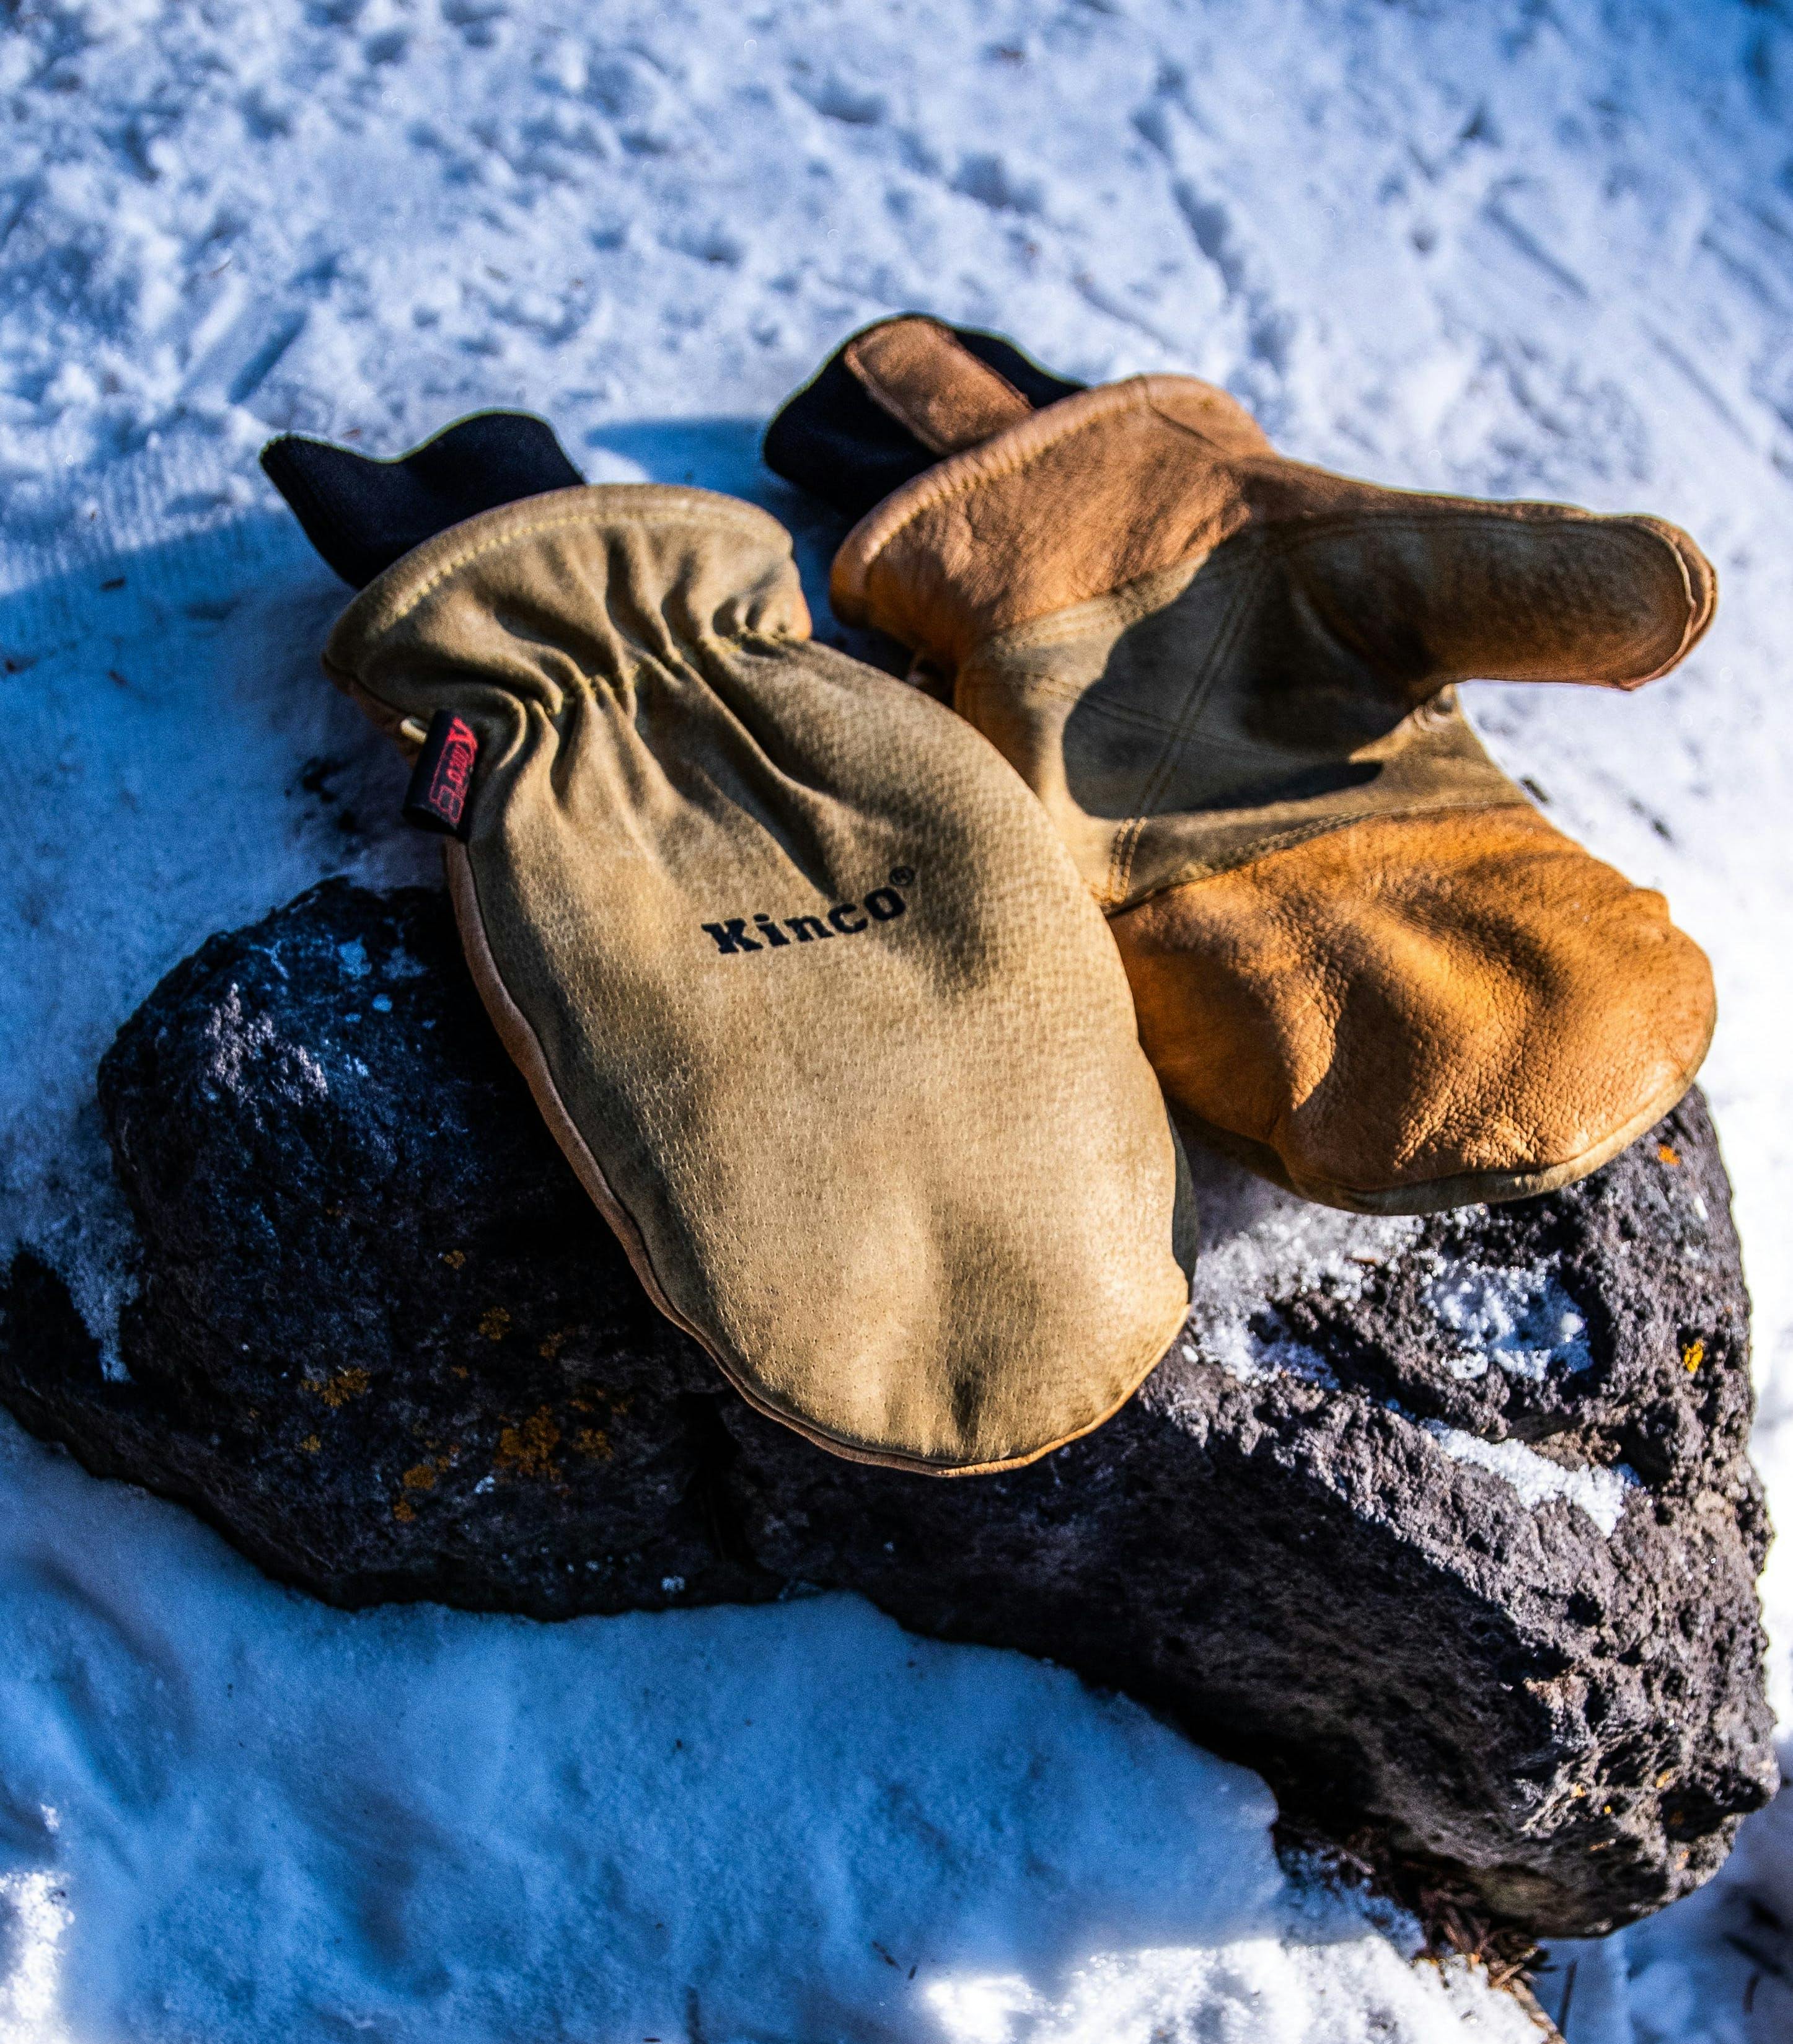 A pair of leather mittens sit on a rock in the snow.